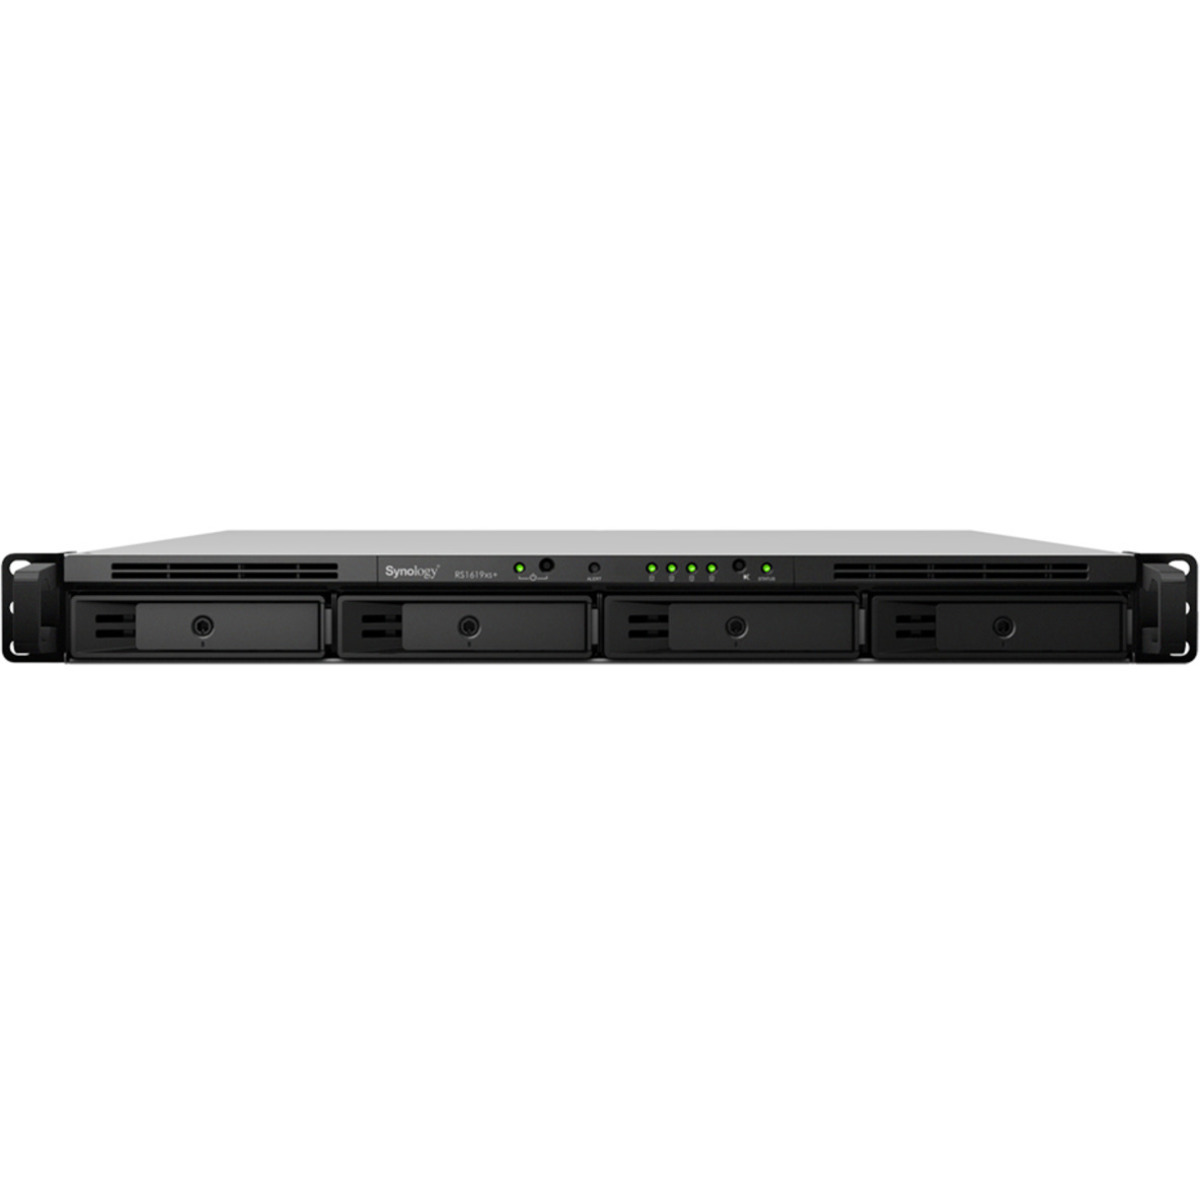 Synology RackStation RS1619xs+ 28tb 4-Bay RackMount Multimedia / Power User / Business NAS - Network Attached Storage Device 2x14tb Toshiba Enterprise Capacity MG07ACA14TE 3.5 7200rpm SATA 6Gb/s HDD ENTERPRISE Class Drives Installed - Burn-In Tested RackStation RS1619xs+